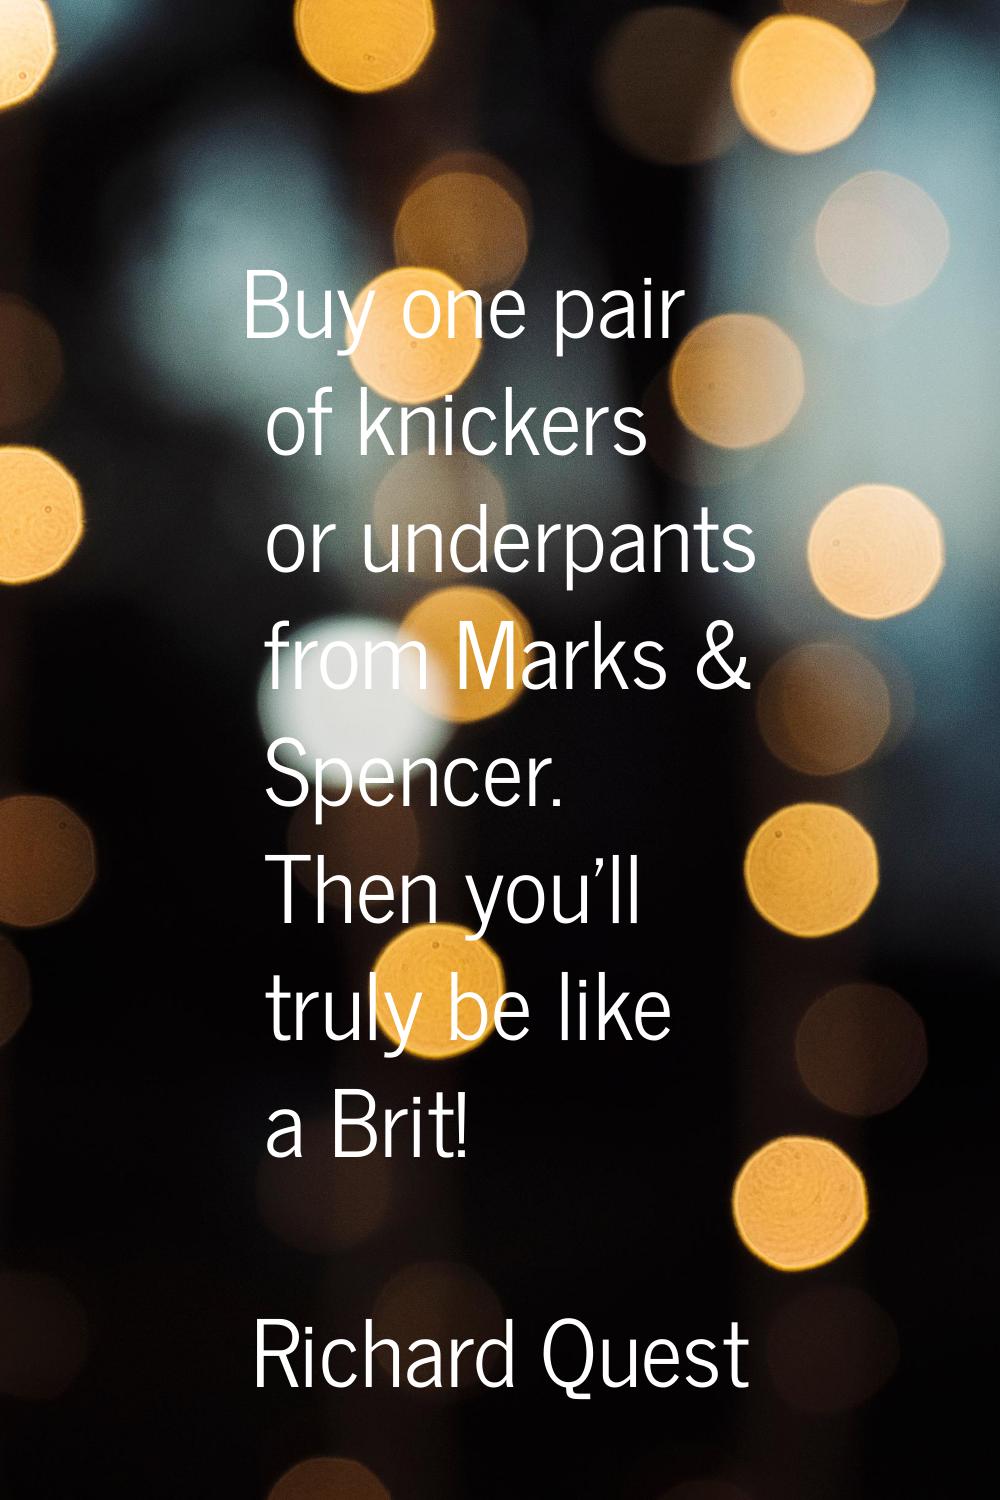 Buy one pair of knickers or underpants from Marks & Spencer. Then you'll truly be like a Brit!